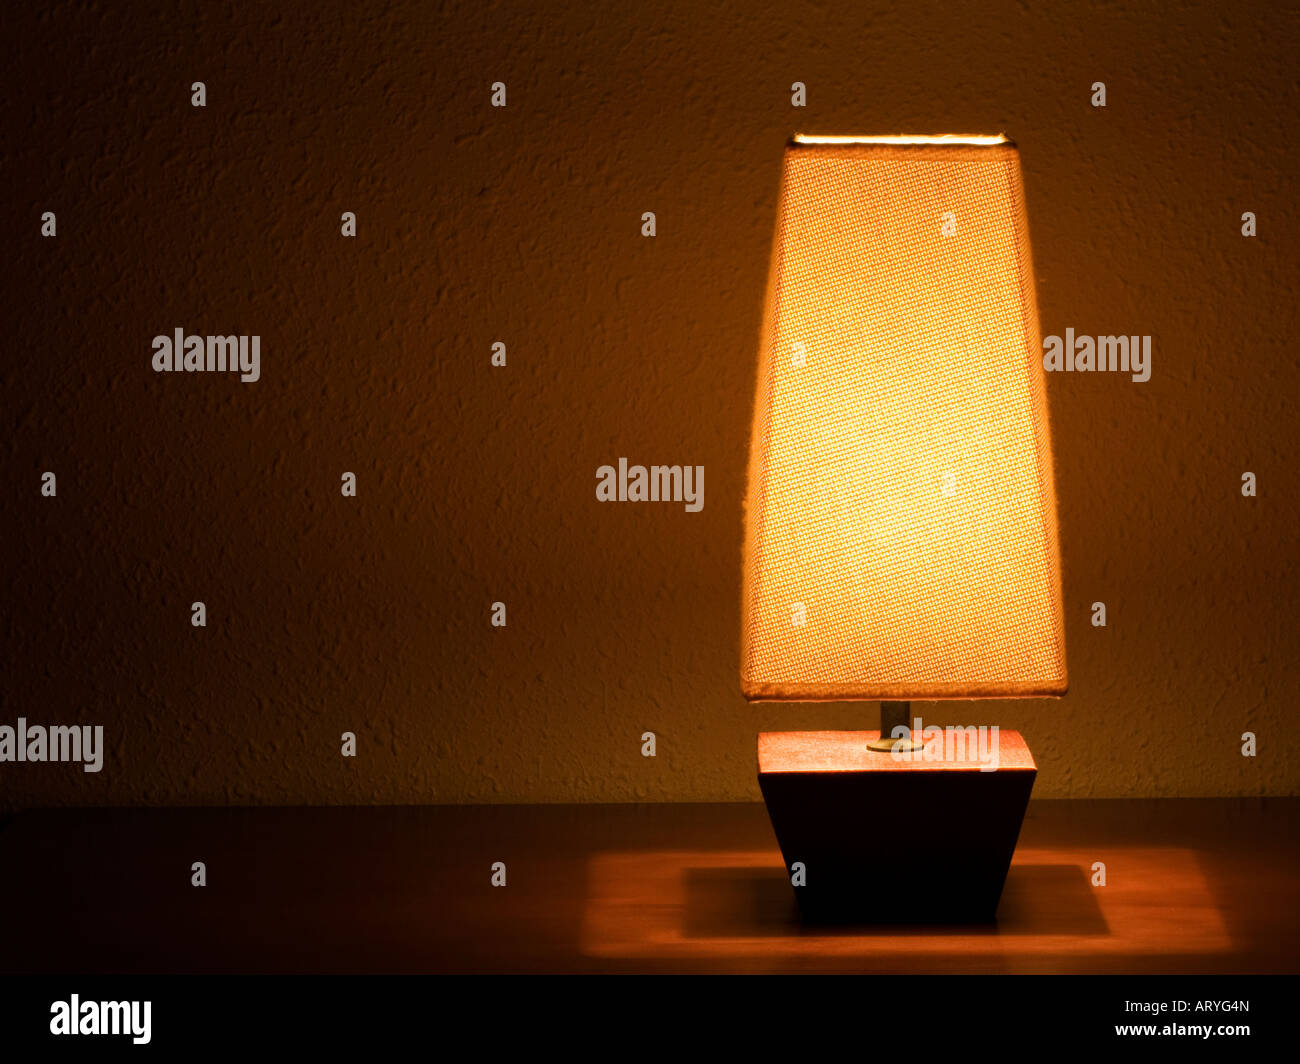 Lit bedside lamp over nightstand Stock Photo